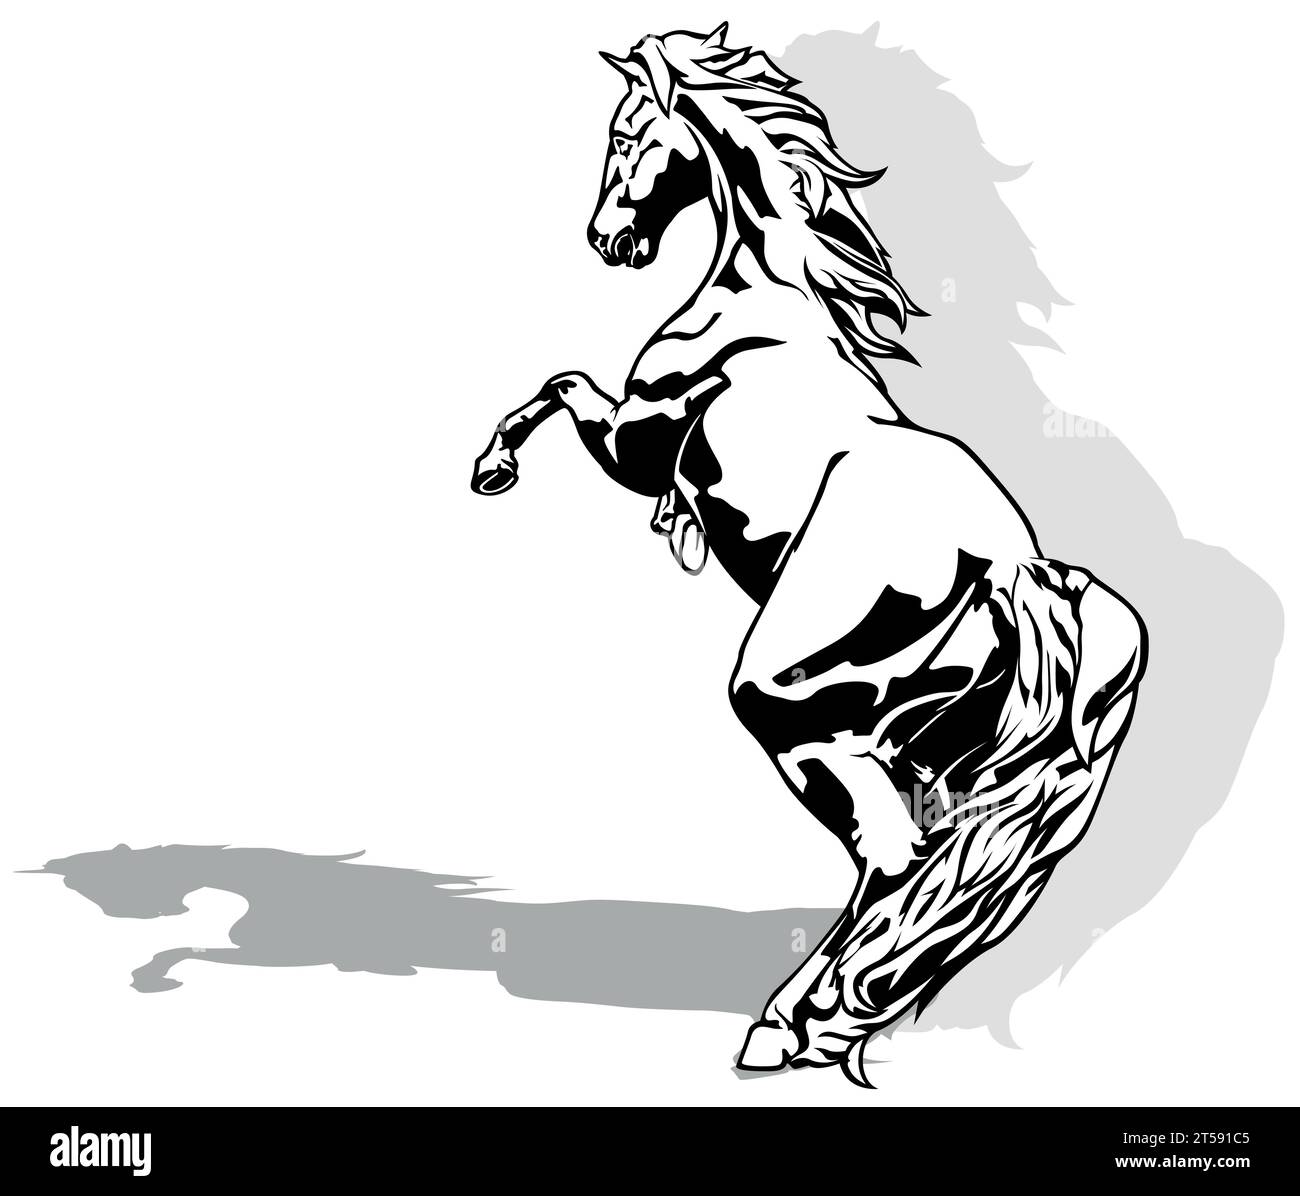 Drawing of Rising Horse on a Hind Legs Stock Vector